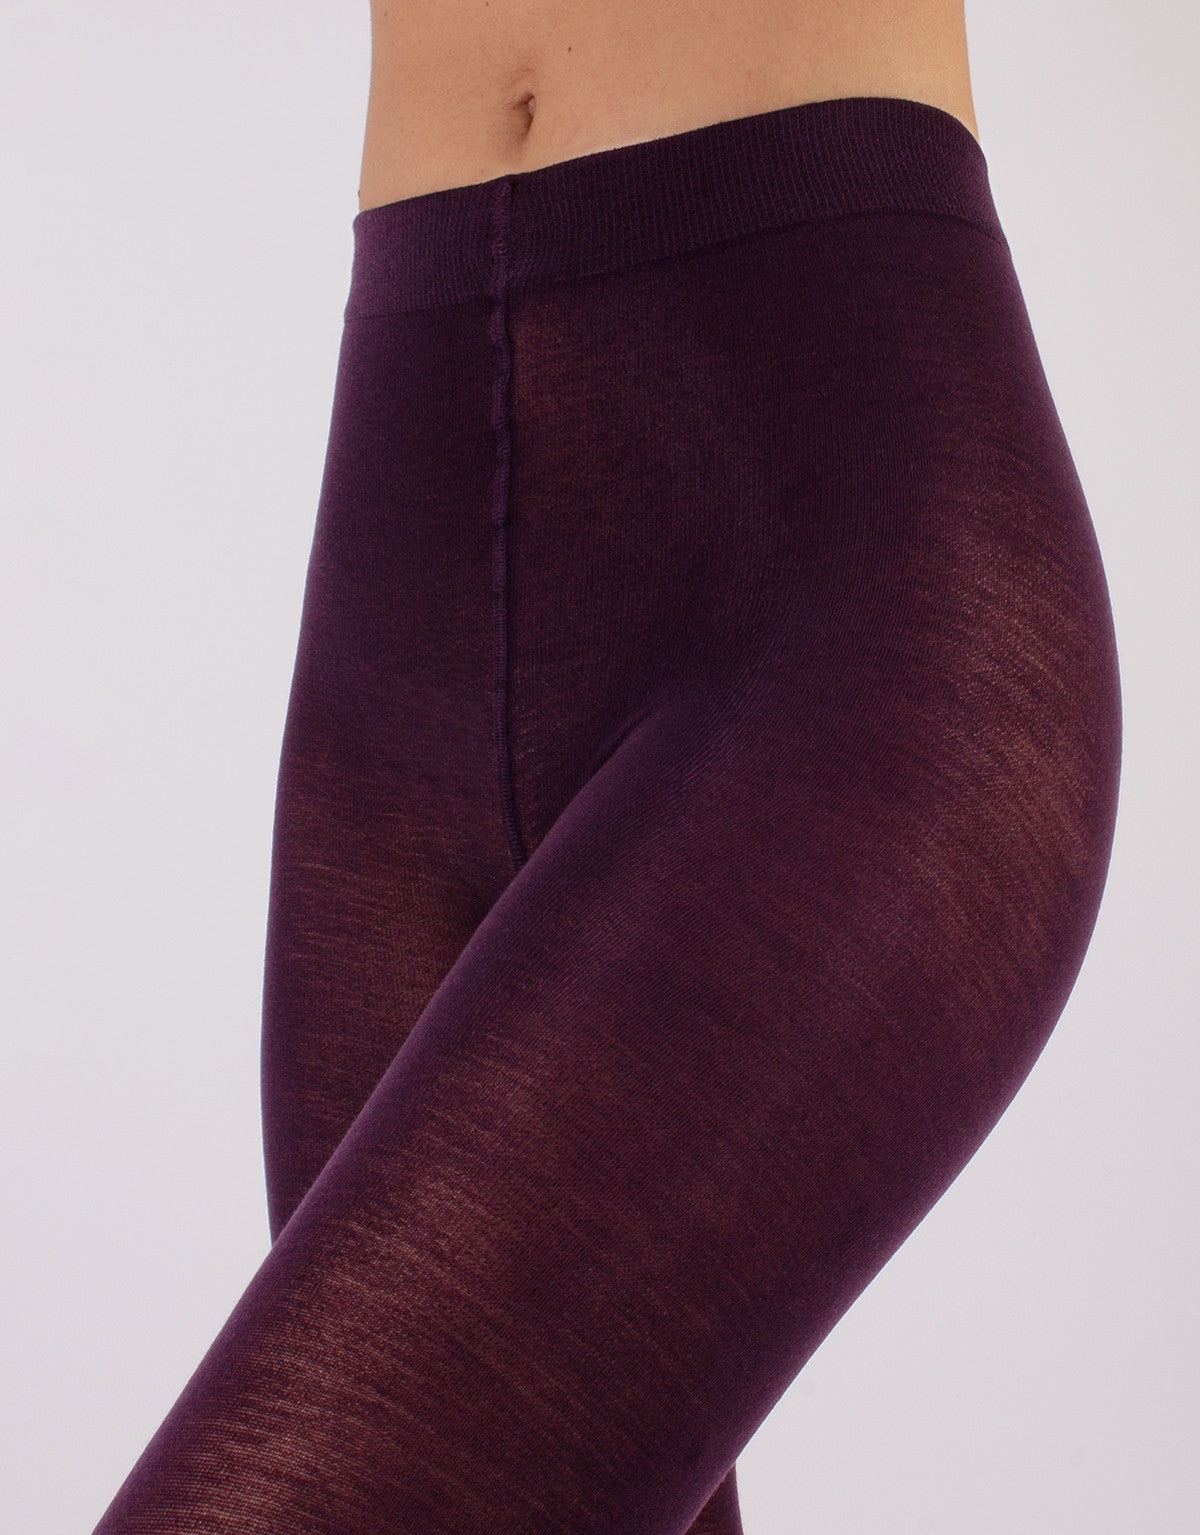 Calzitaly Dark Purple Merino Tights - Light and warm knitted thermal tights with deep waistband and gusset, perfect for cold Winters.